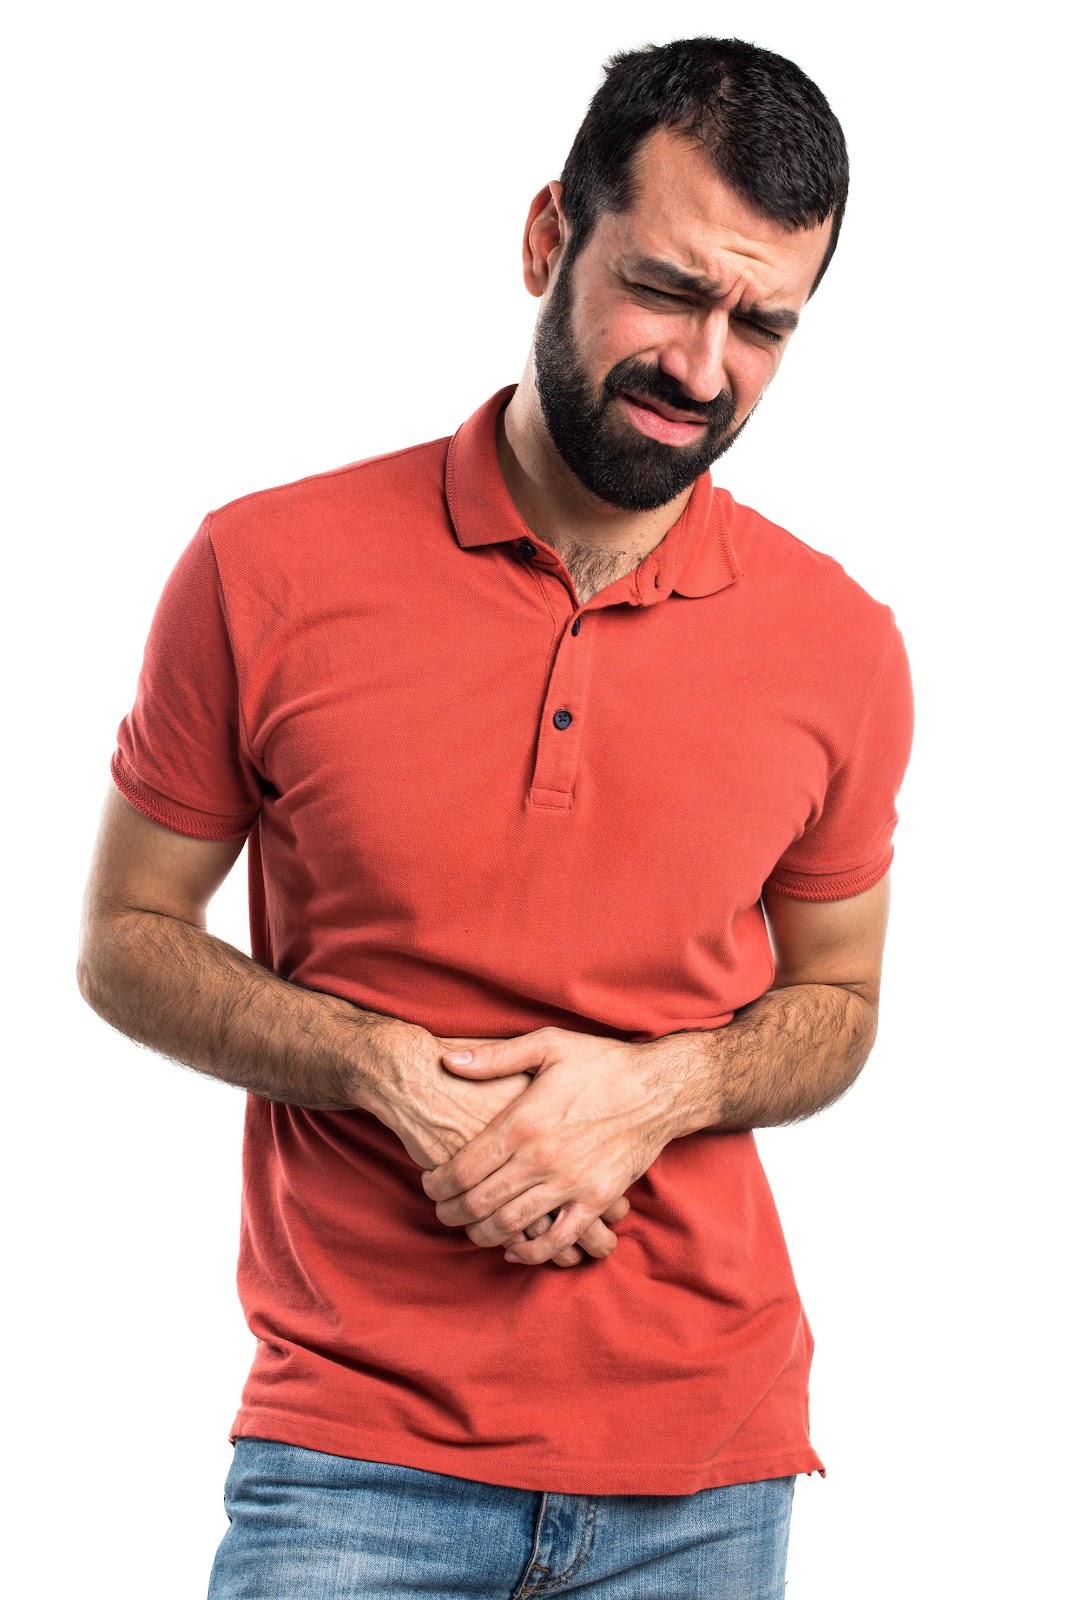 Read more about the article Treatment and prevention for Diverticulitis